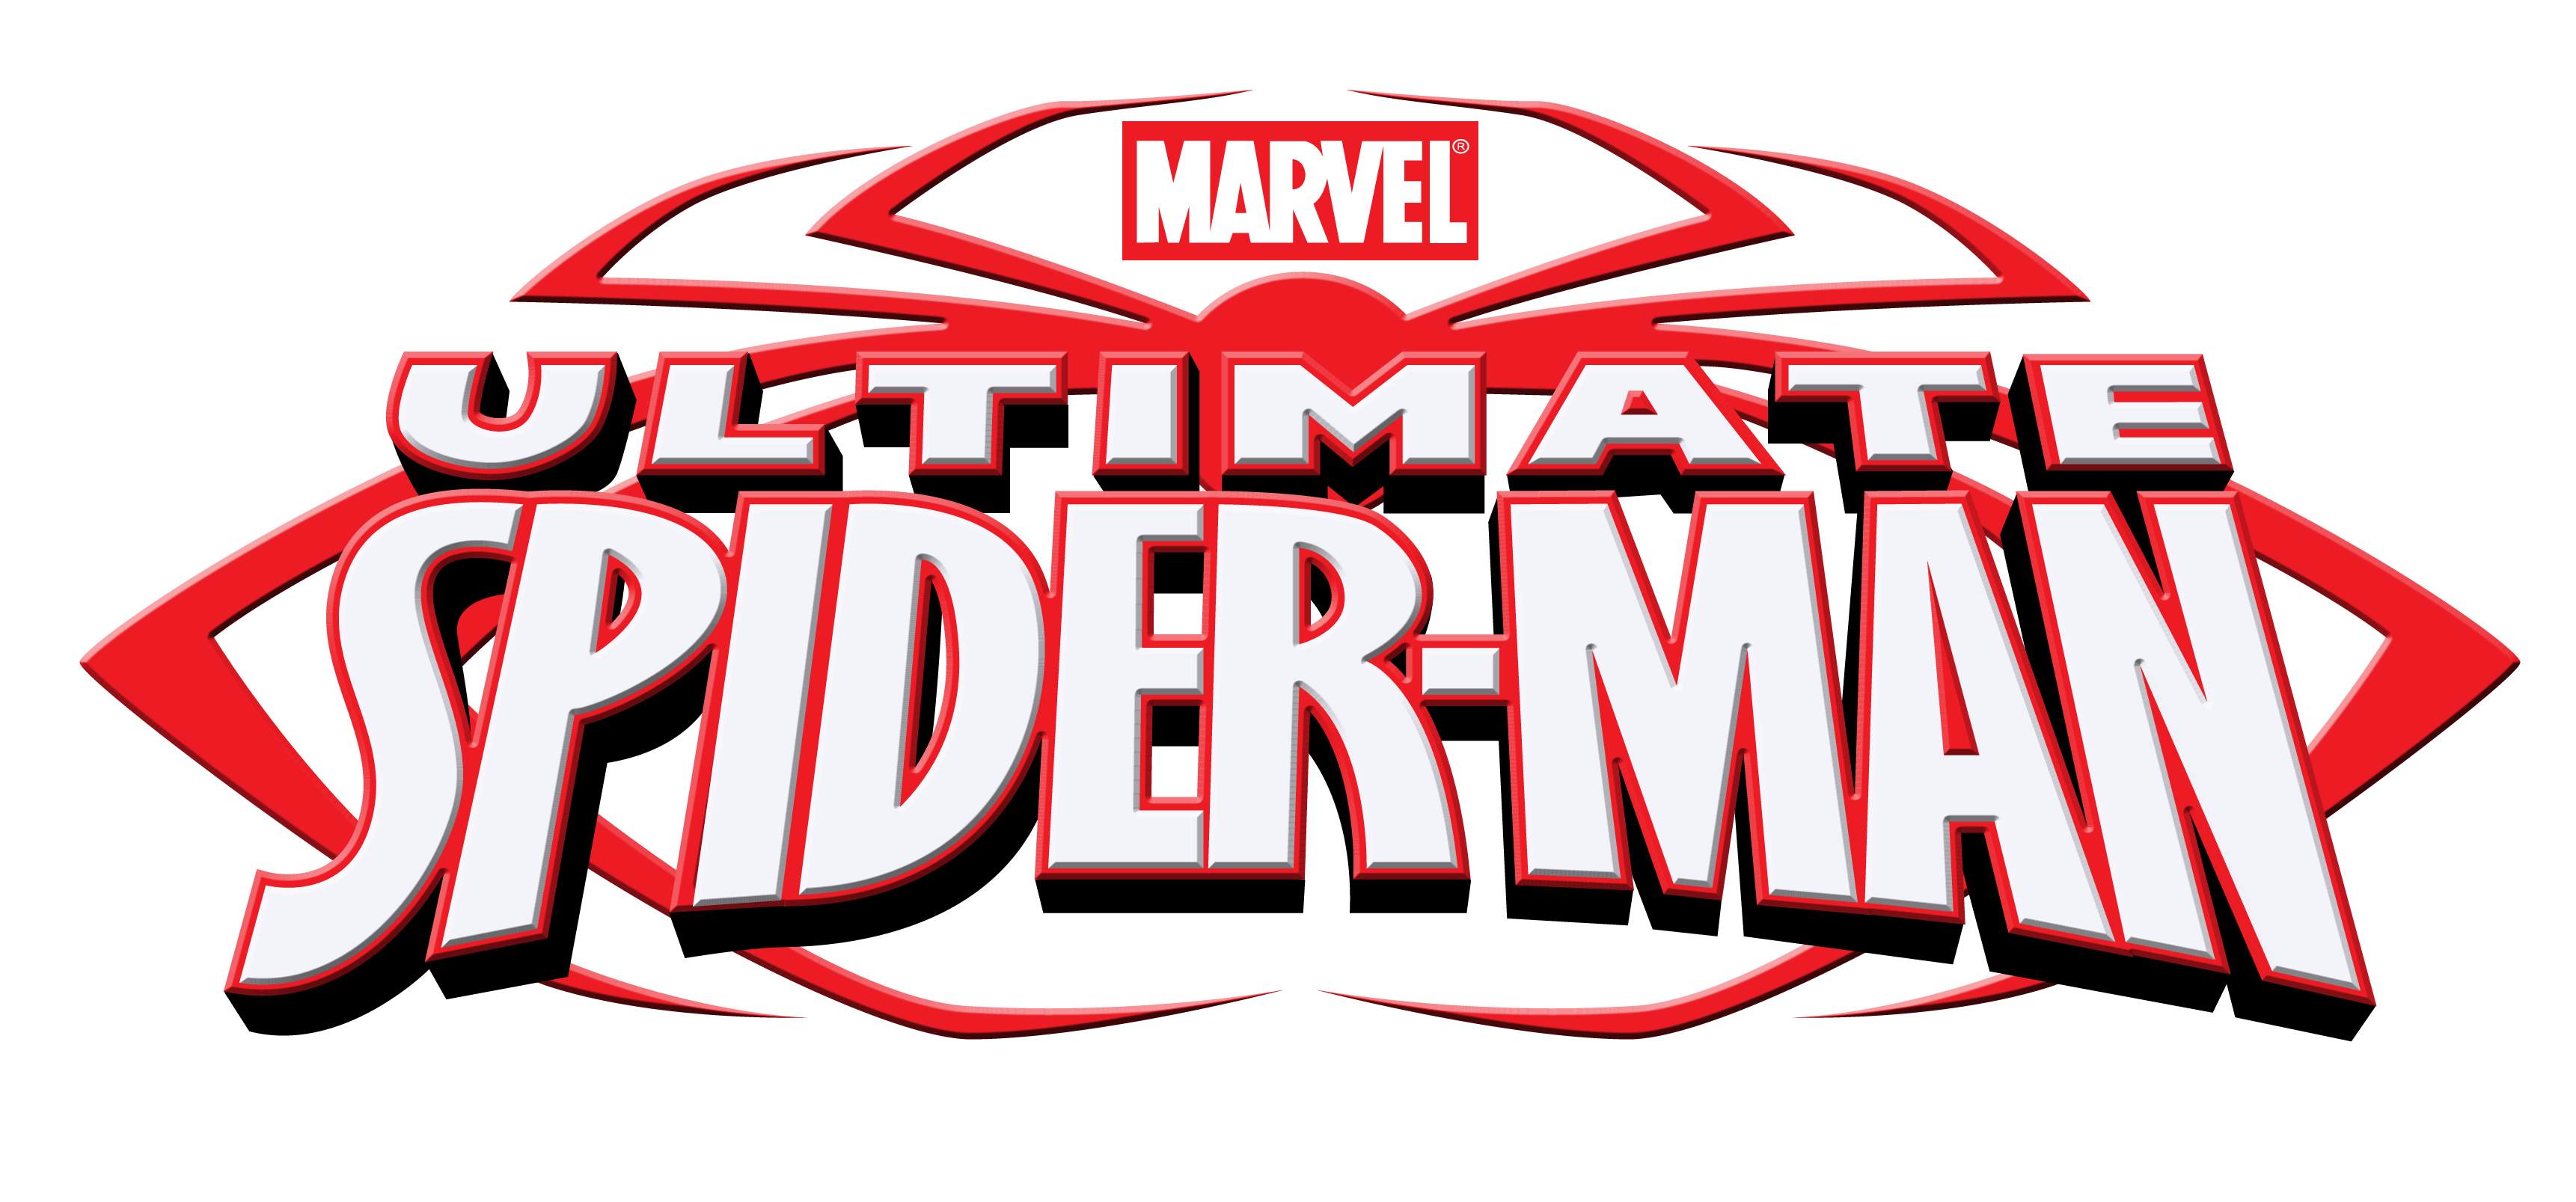 Spider man.Png - Imagui